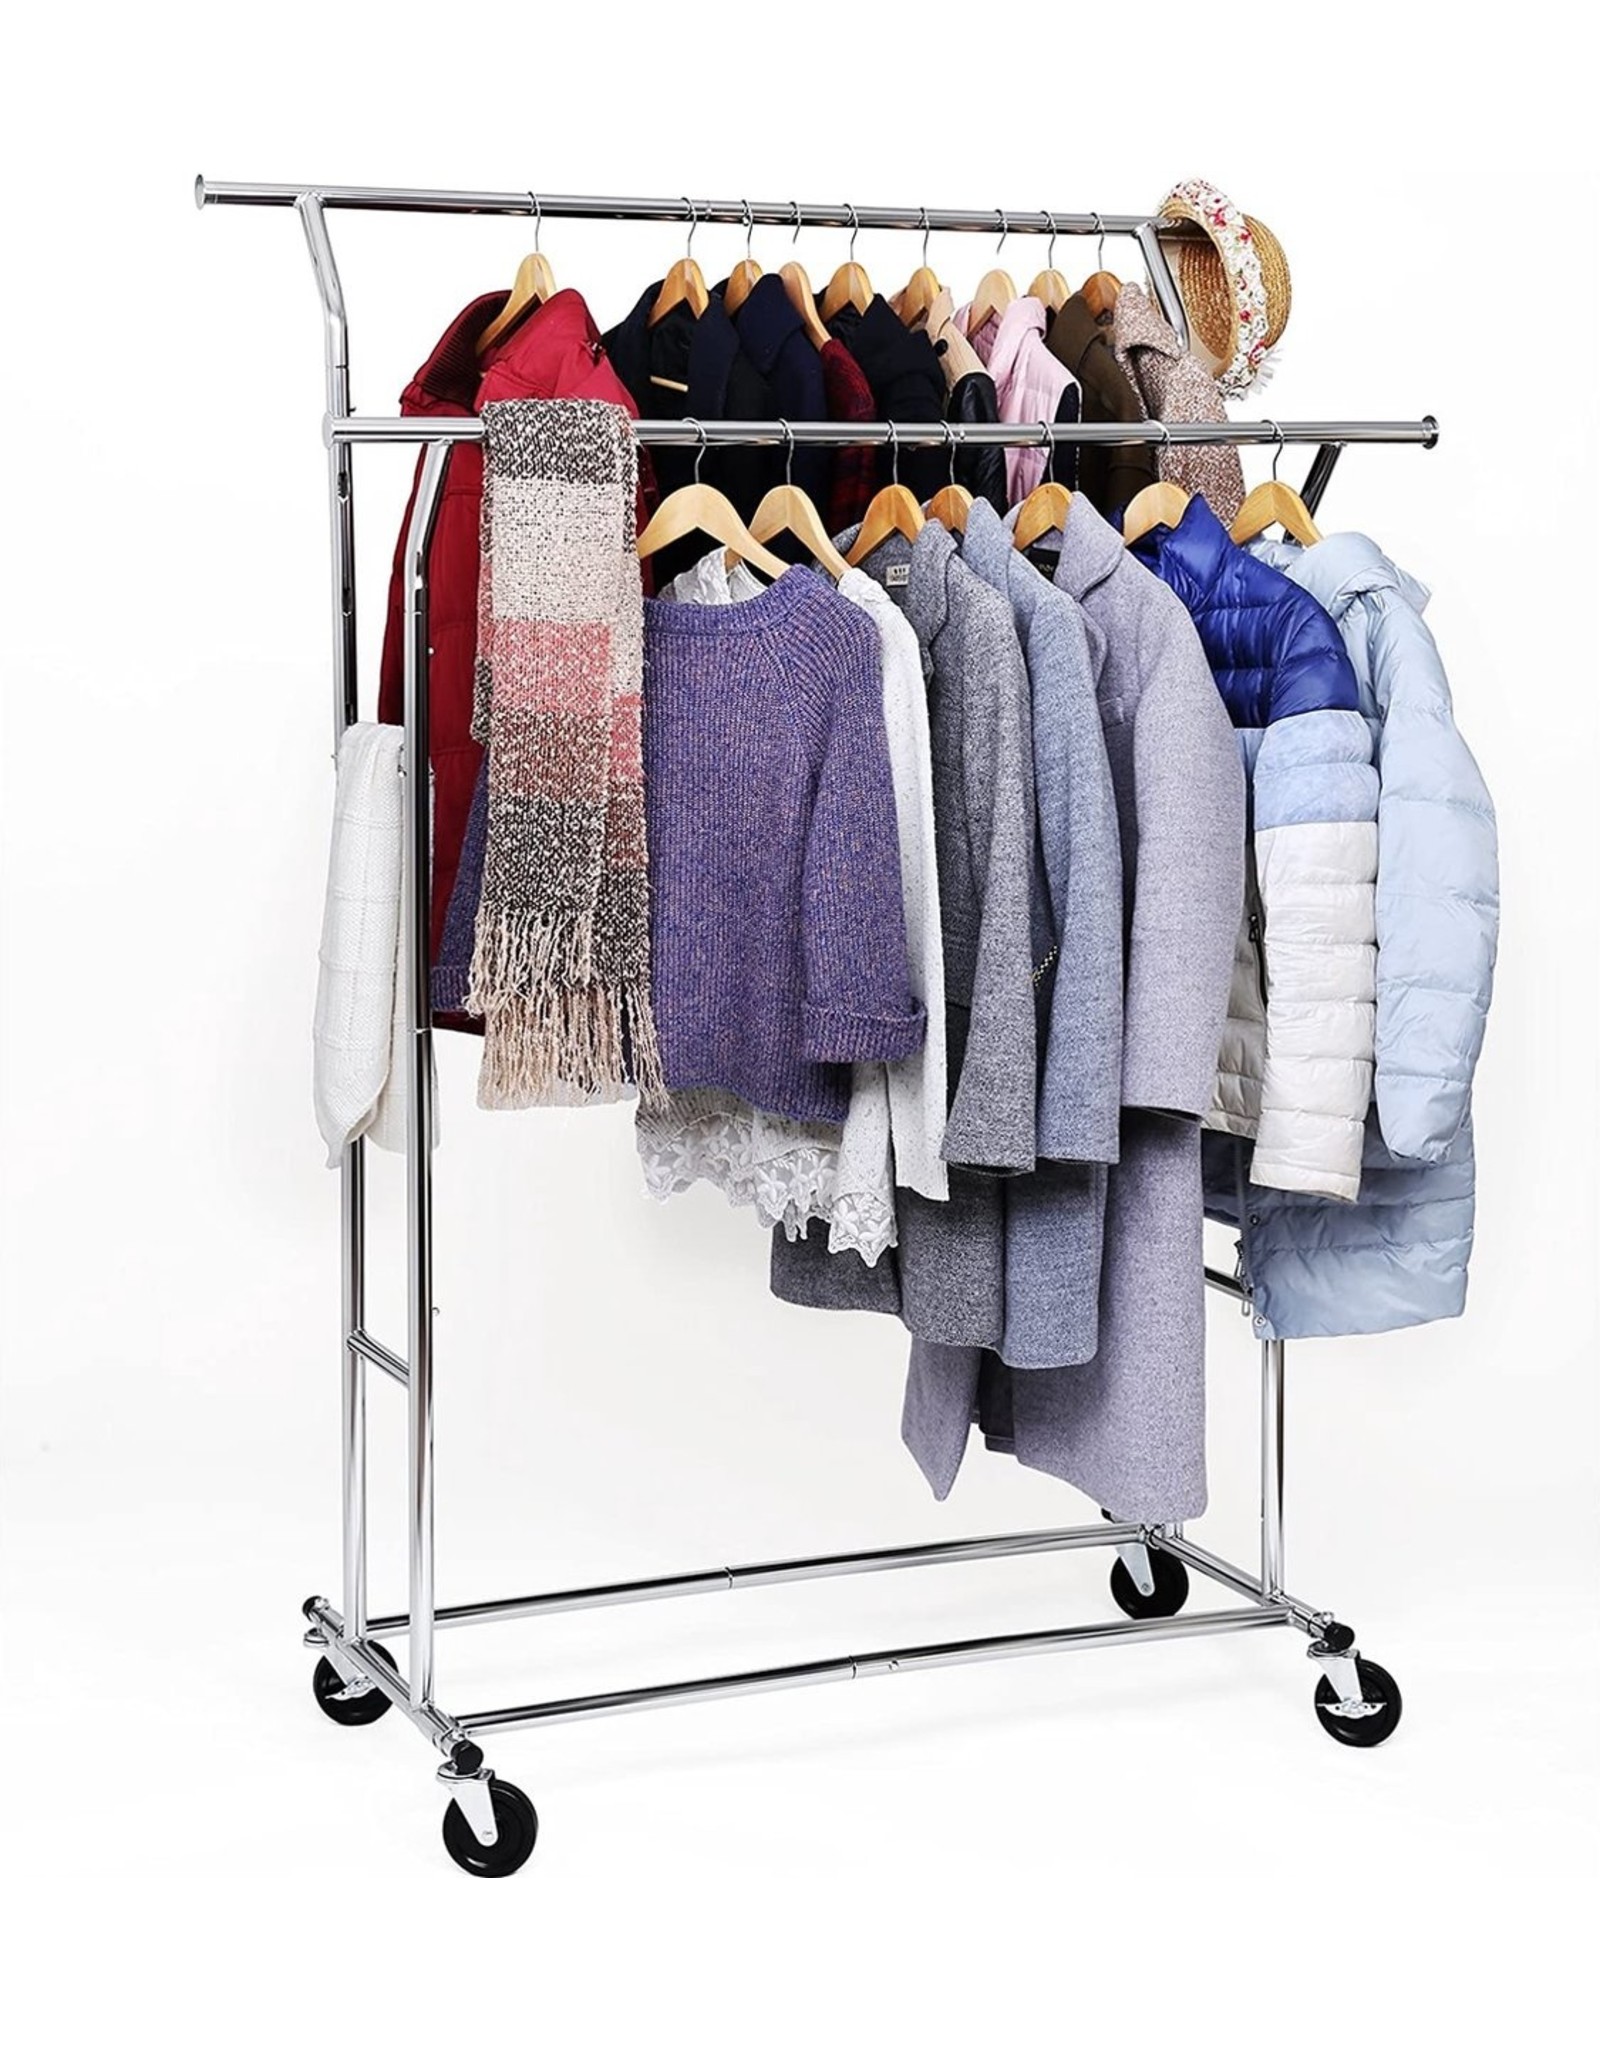 clothes rack on 4 large wheels - very stable up to 110 kg - adjustable